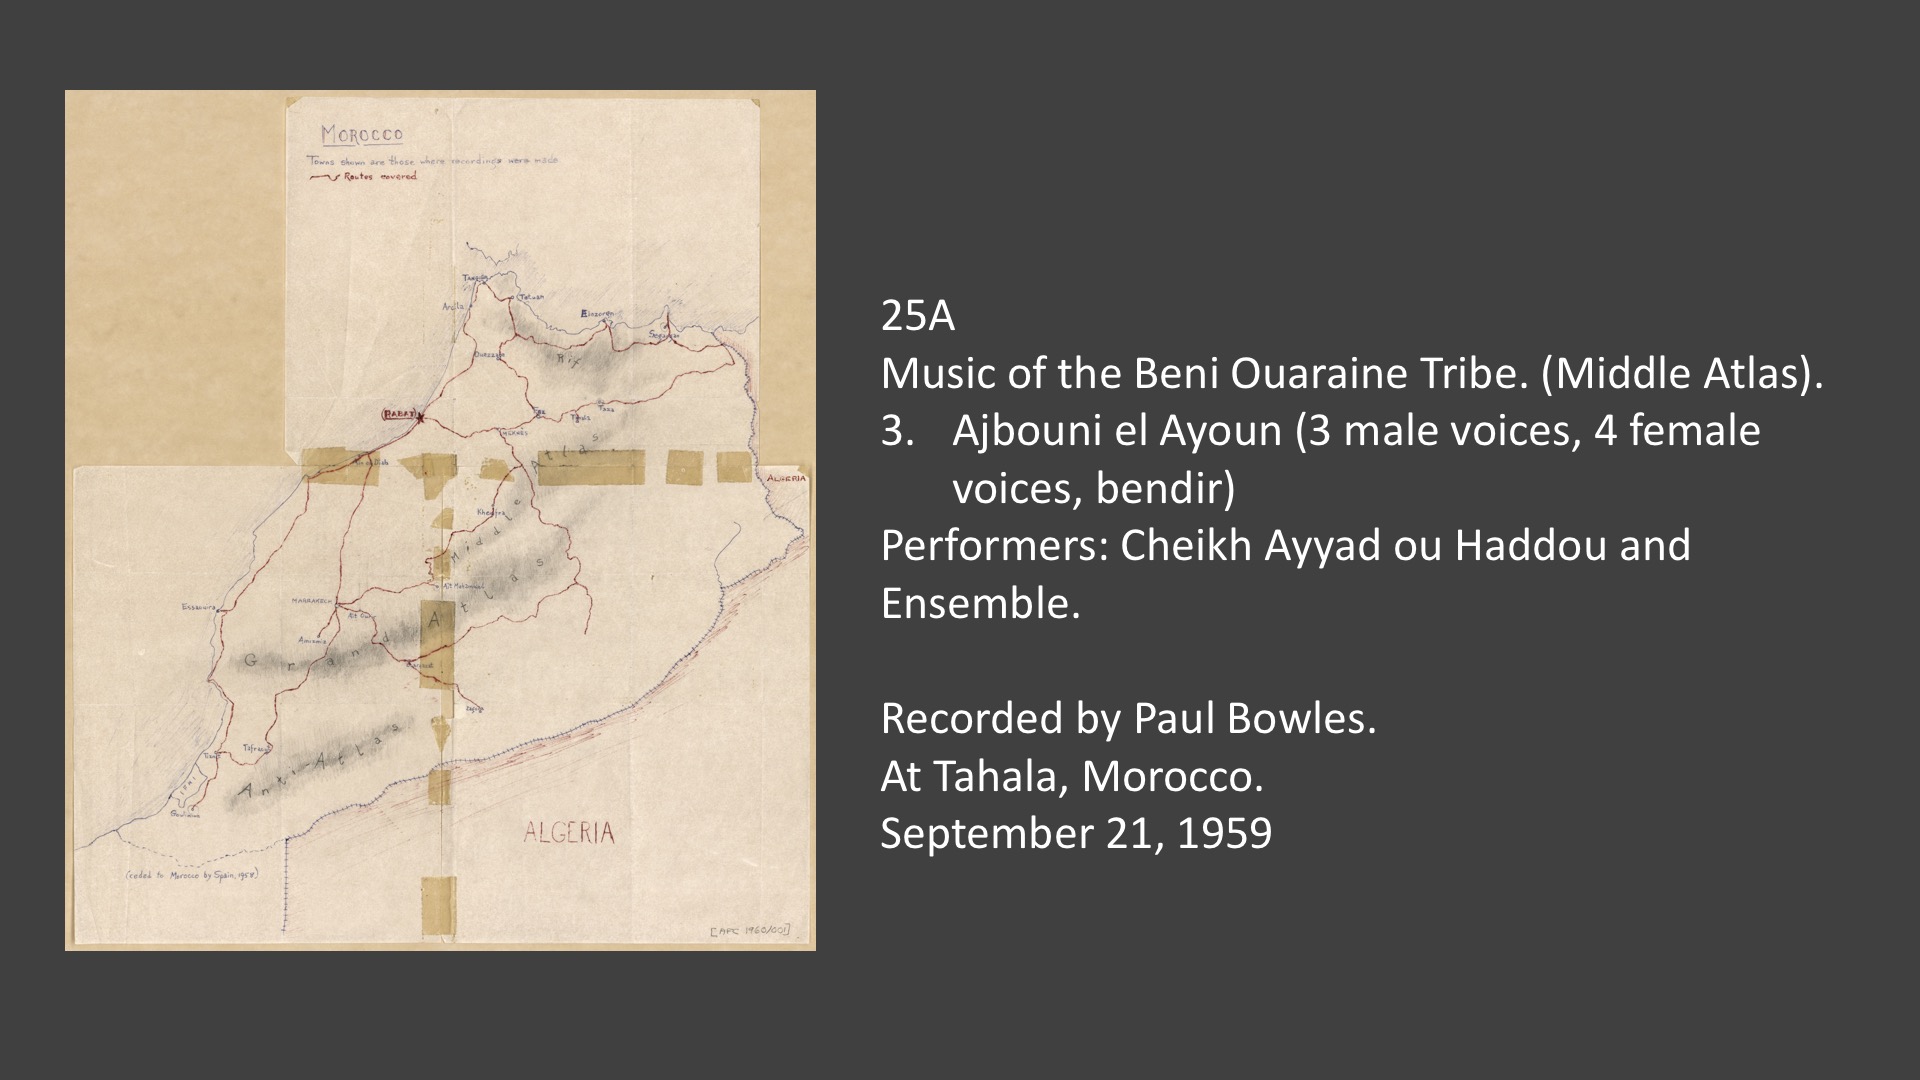 25A Music of the Beni Ouaraine Tribe. (Middle Atlas). 3. Ajbouni el Ayoun (3 male voices, 4 female voices, bendir).&nbsp; Performers: Cheikh Ayyad ou Haddou and Ensemble.